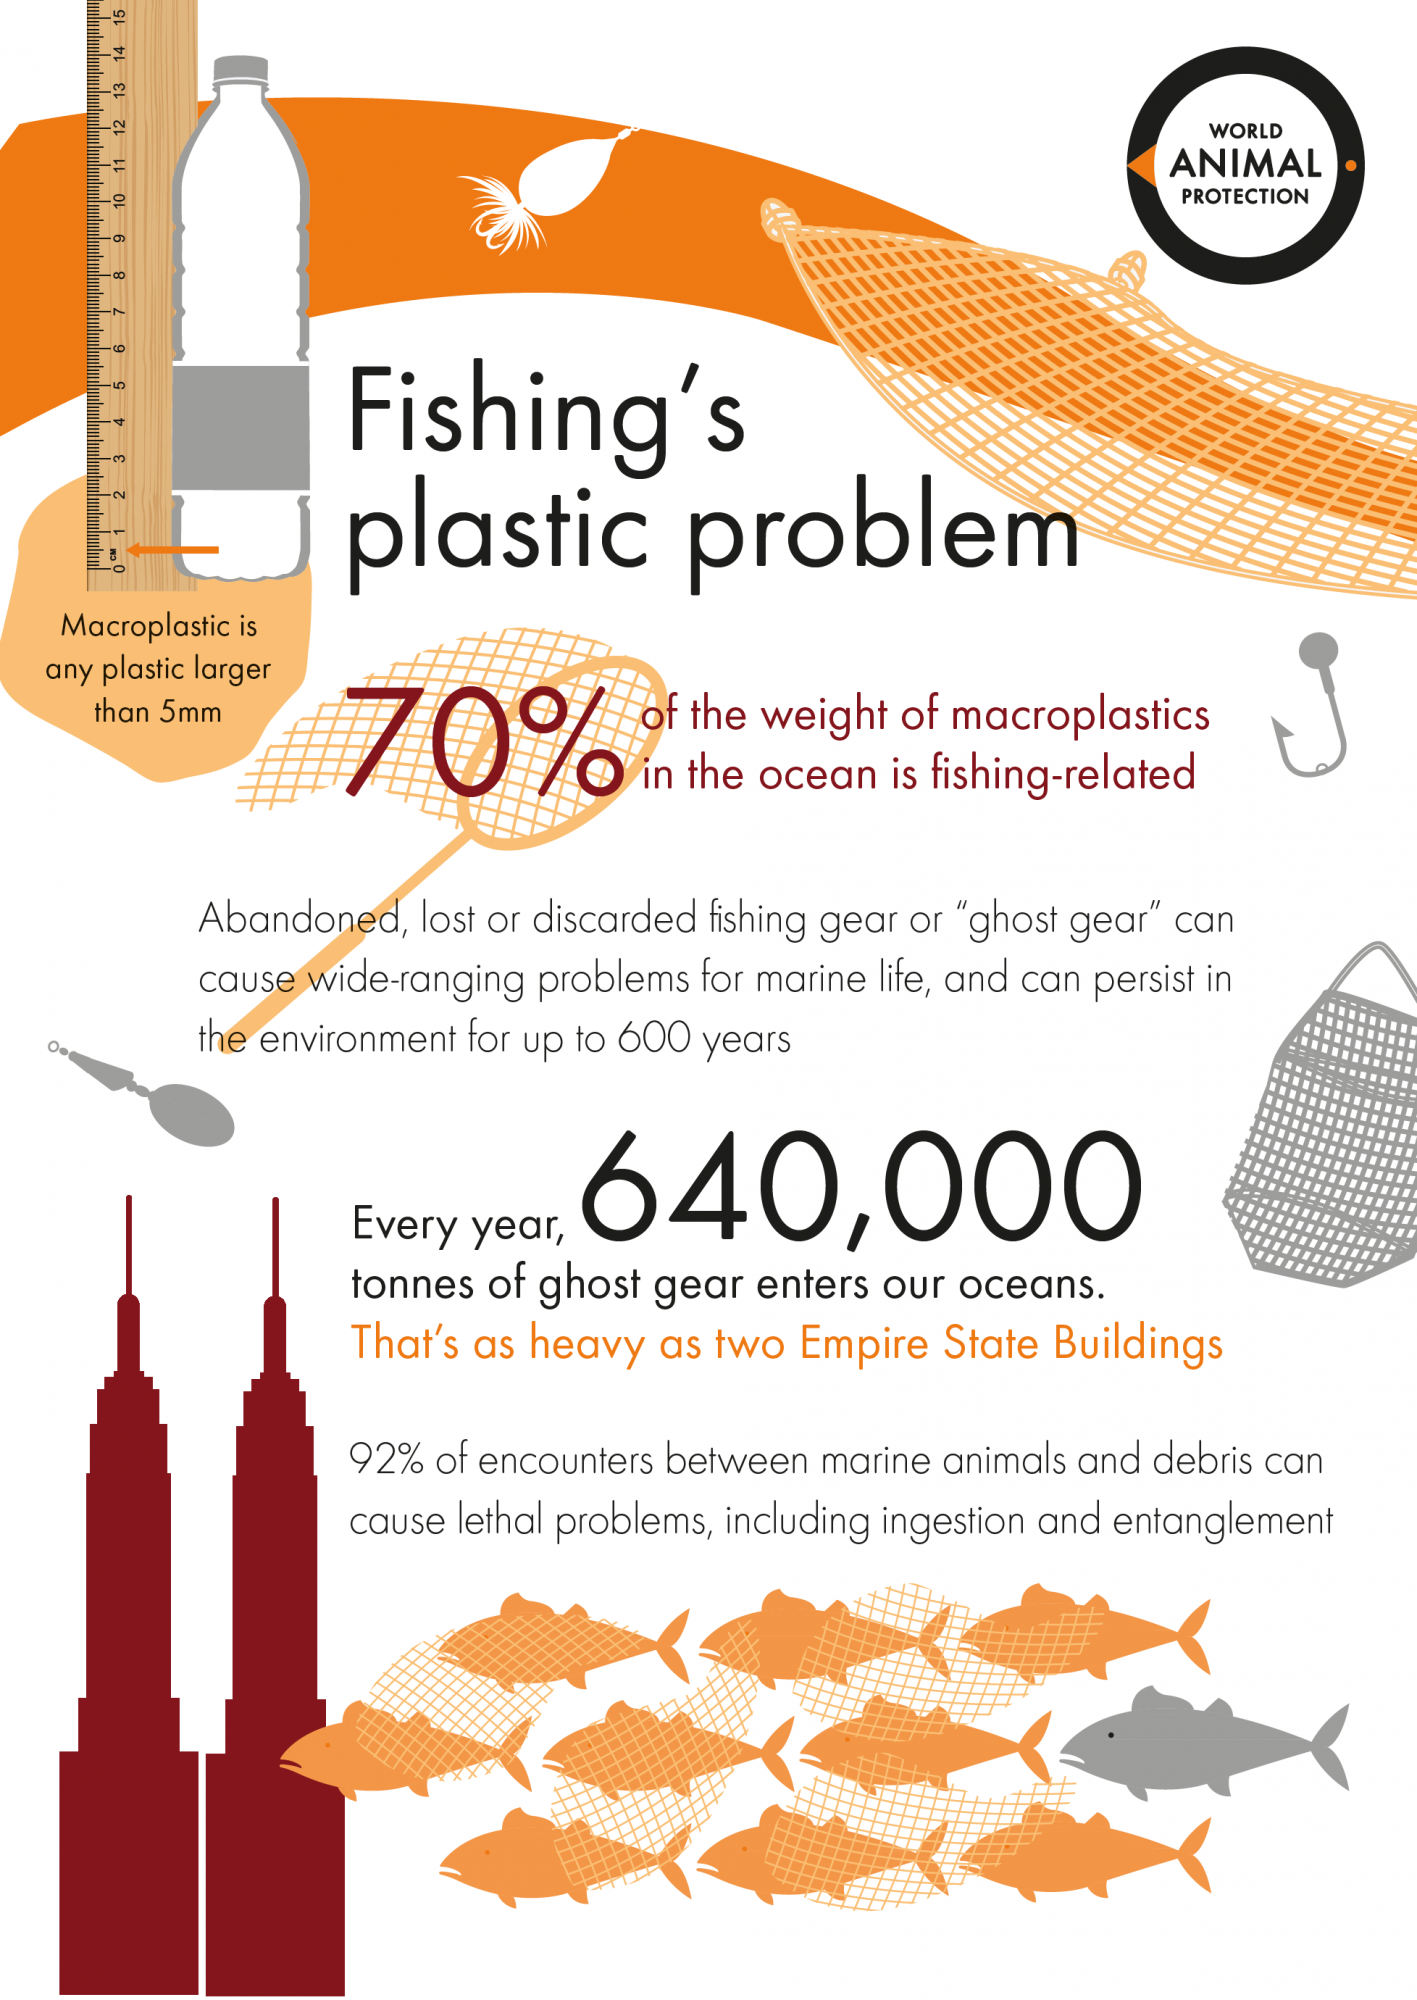 To stop the deaths of countless marine animals, we need to tag fishing gear  | World Animal Protection